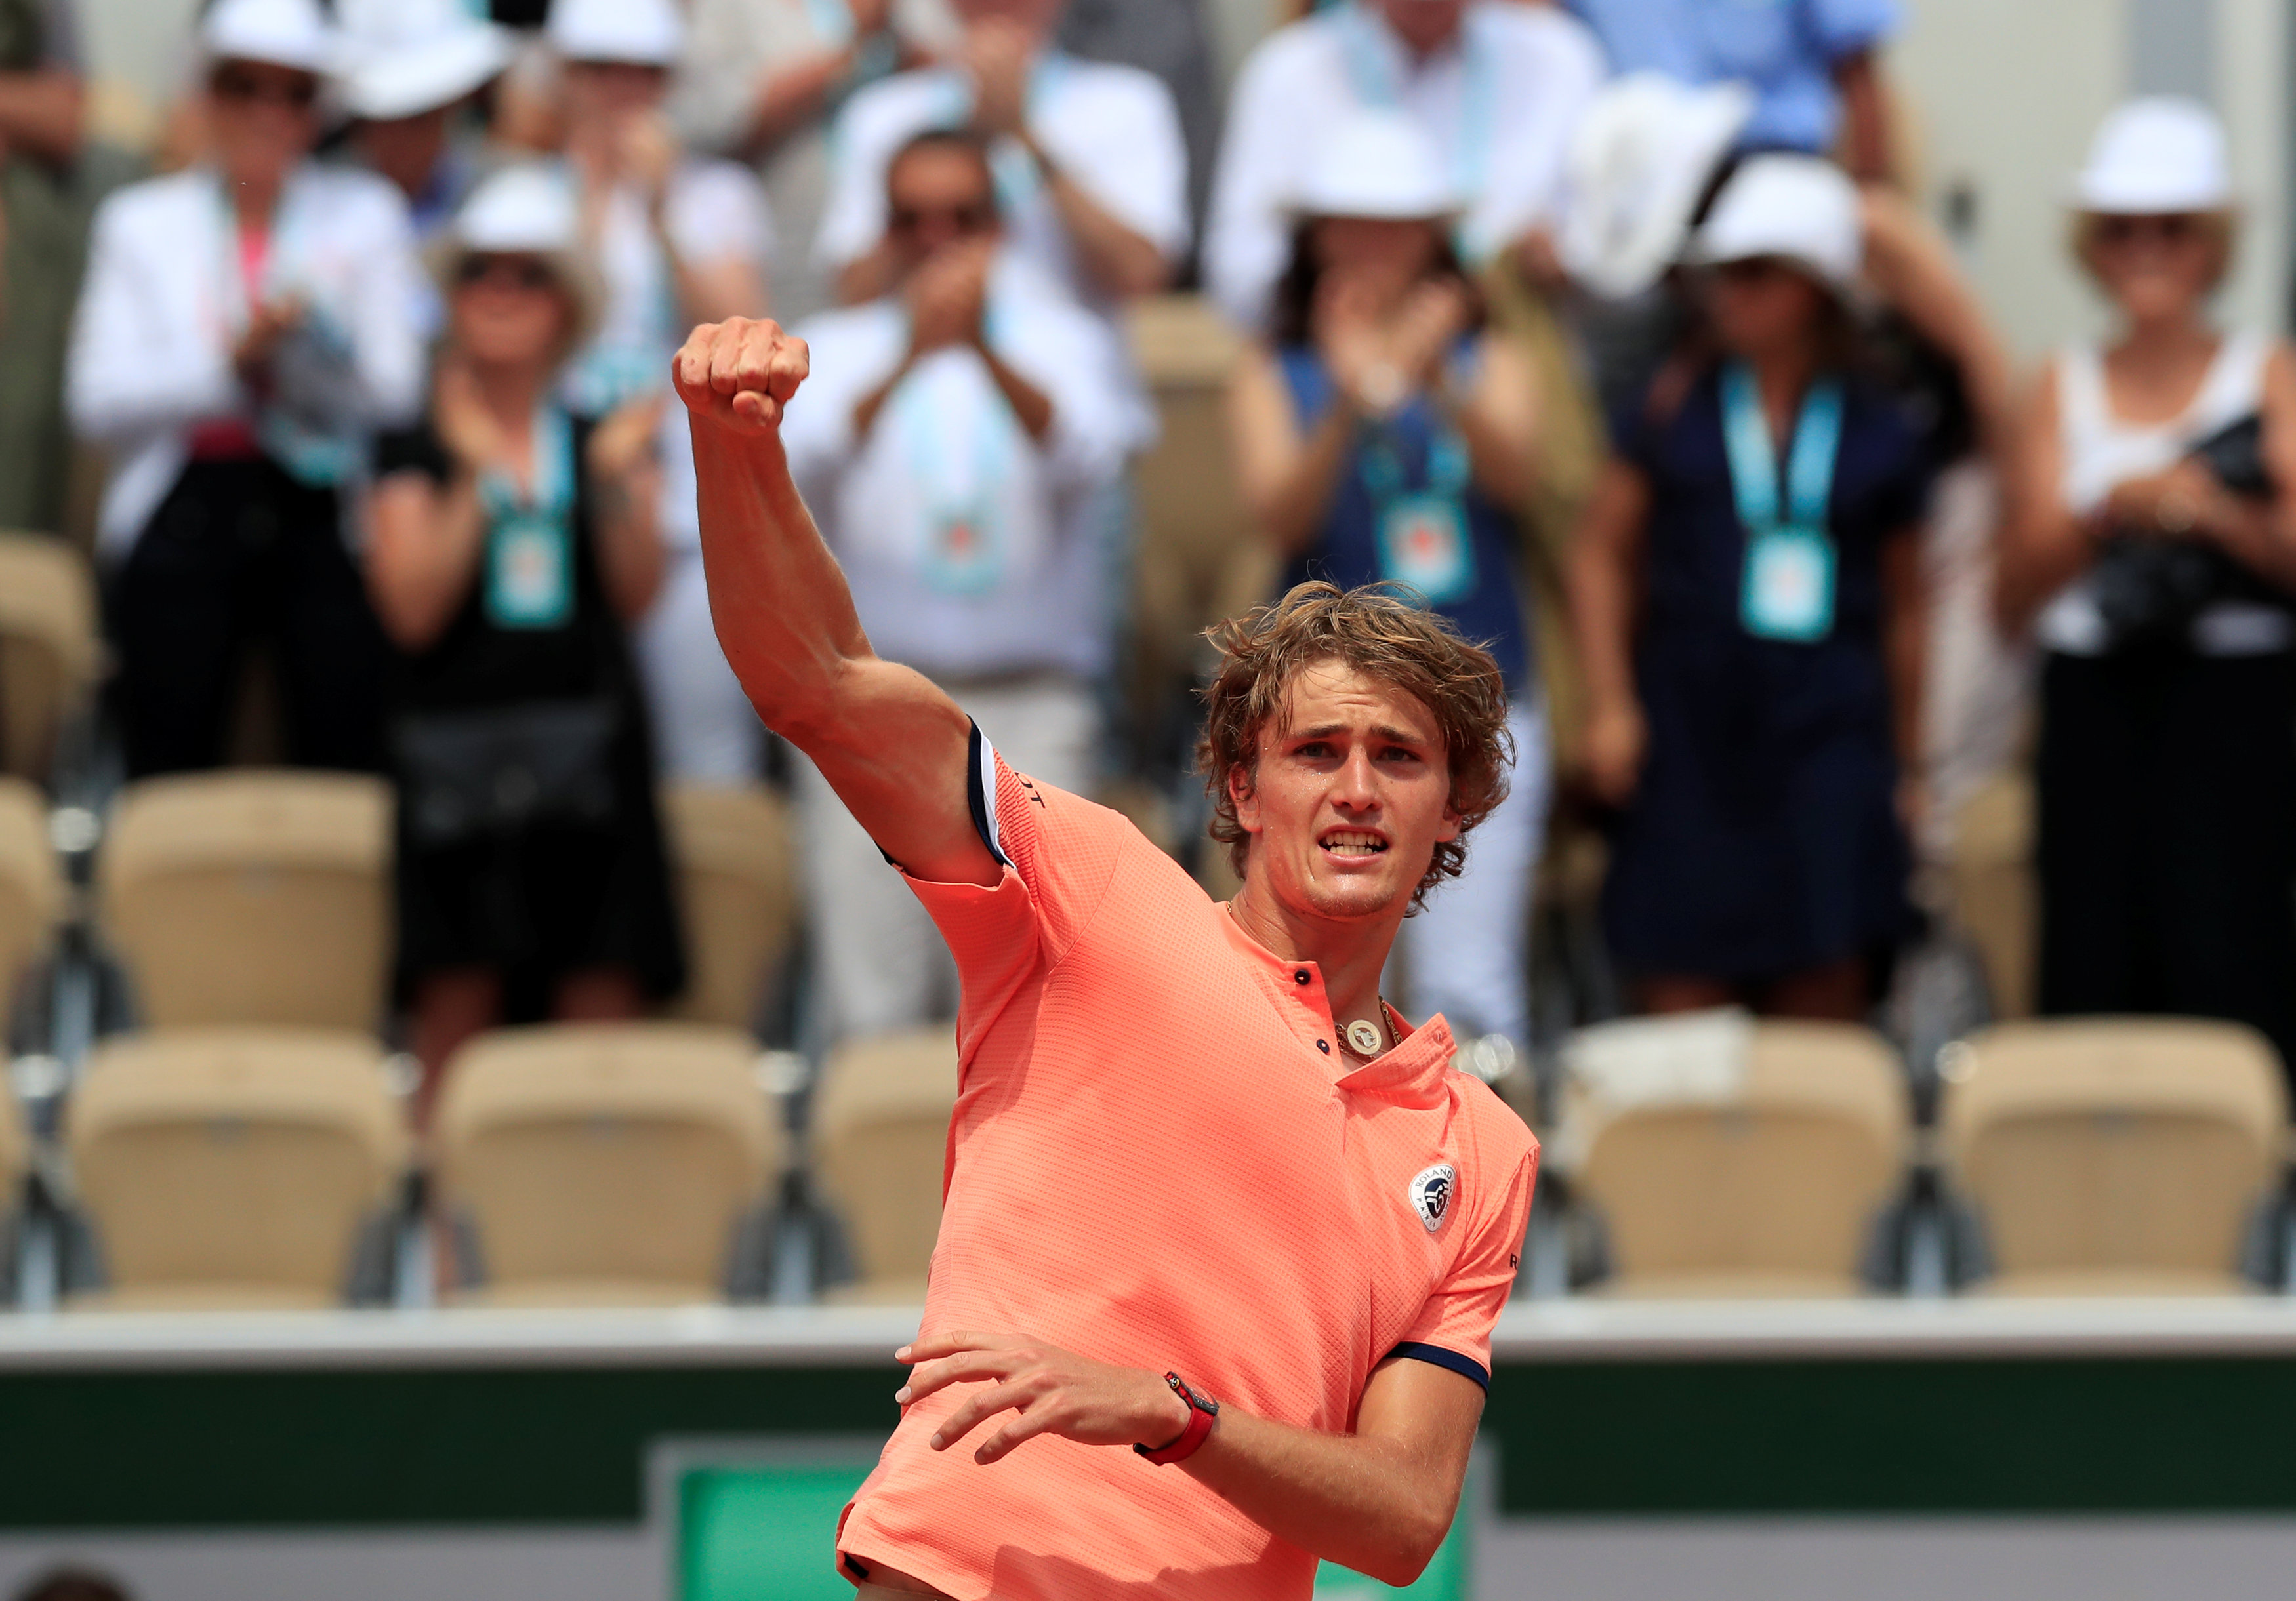 French Open: Zverev survives another five-setter to enter quarterfinals